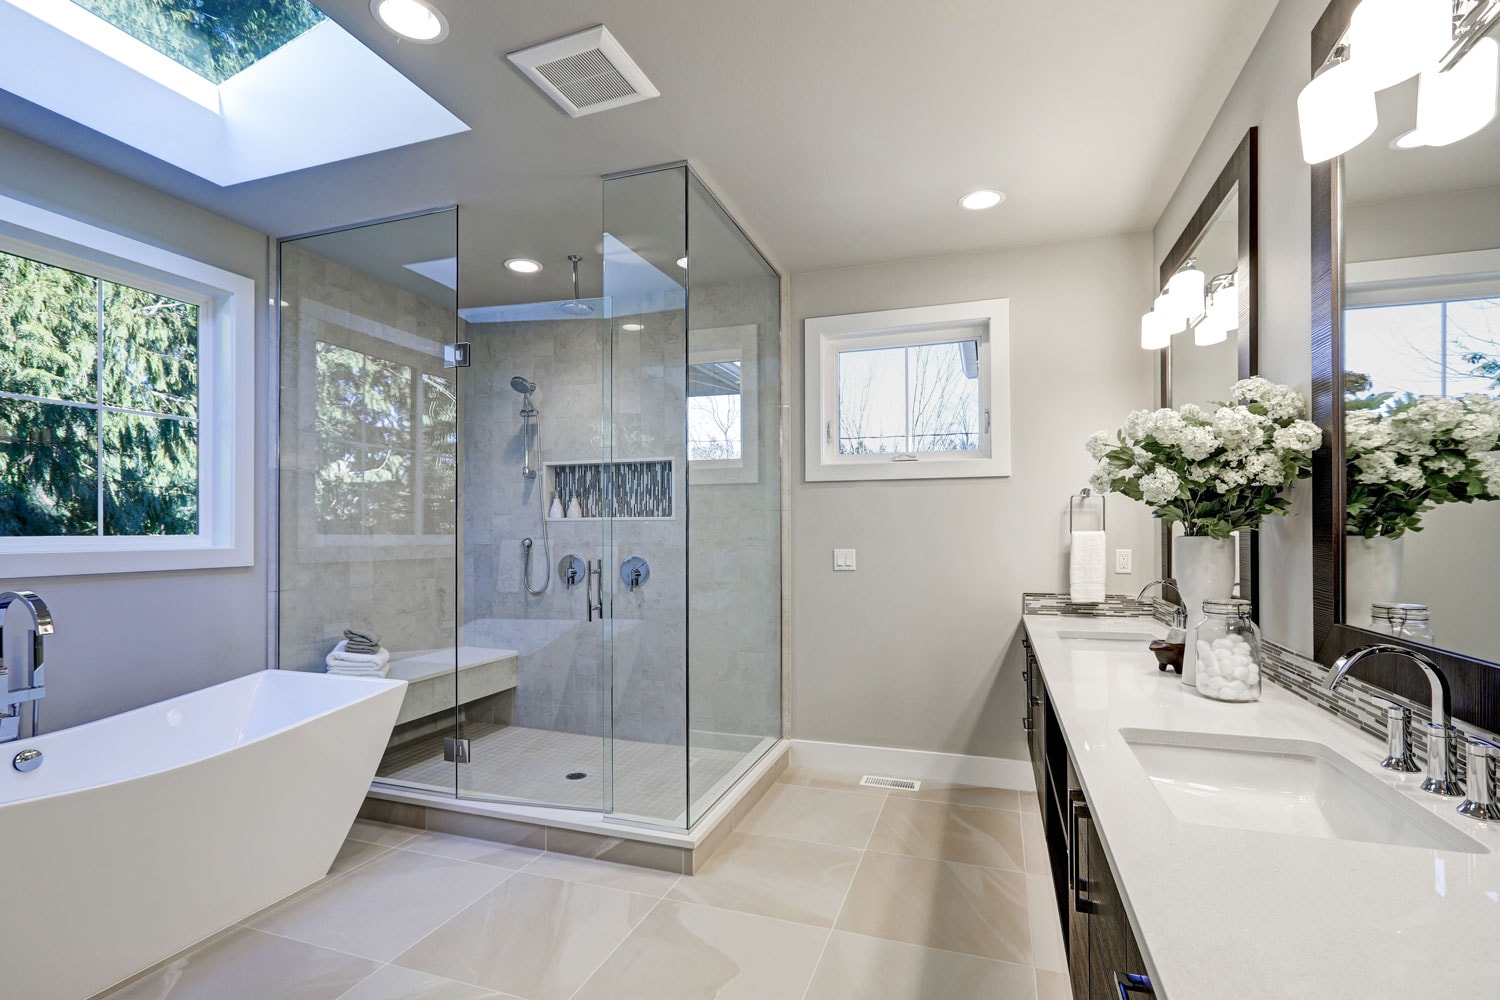 Luxurious and spacious modern bathroom with a glass walled shower area, light gray walls, and white casement windows